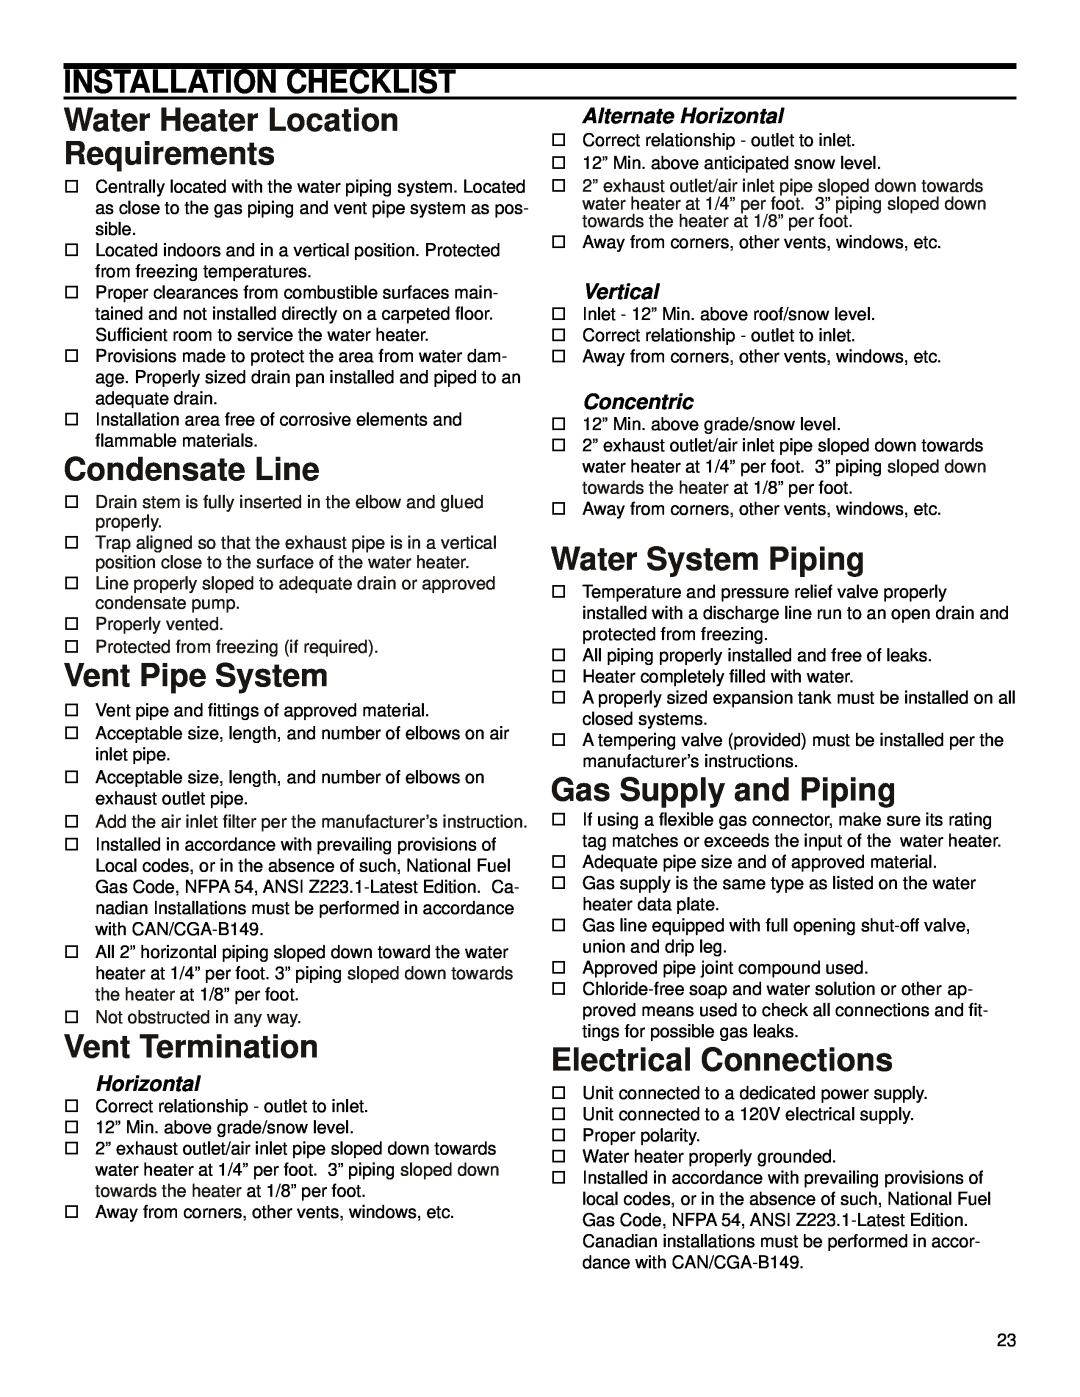 Polaris PG10* 100-199-3NV OR 3PV Installation Checklist, Water Heater Location, Requirements, Condensate Line, Vertical 